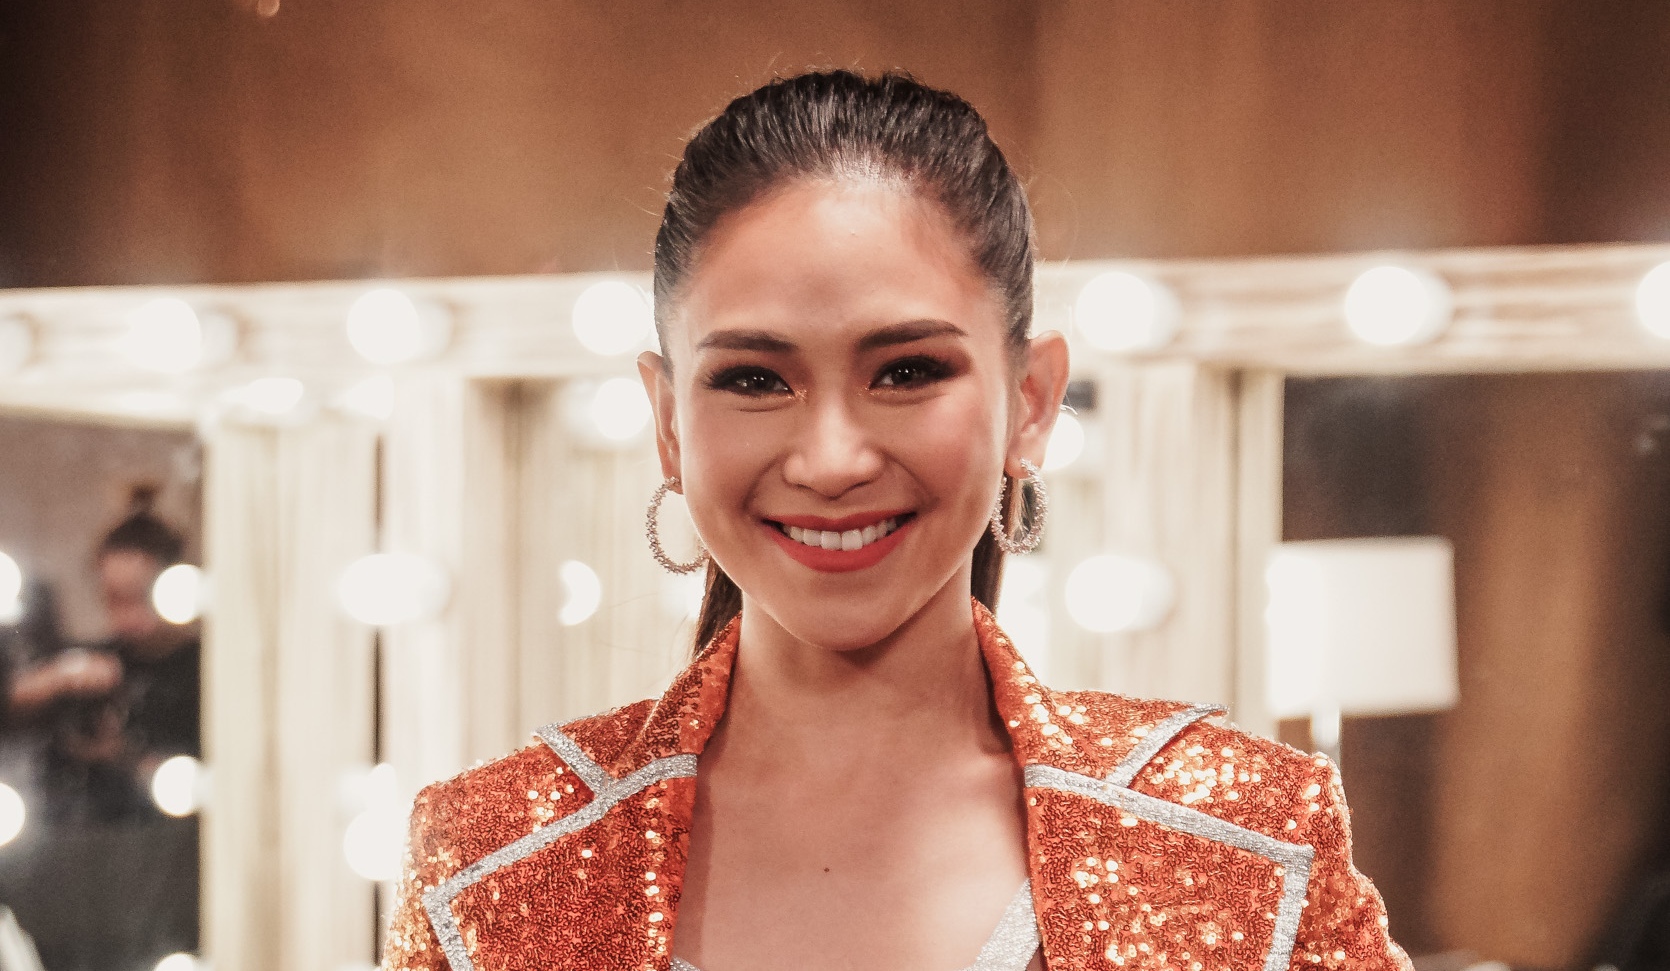 Is Sarah Geronimo a BBMSara supporter?